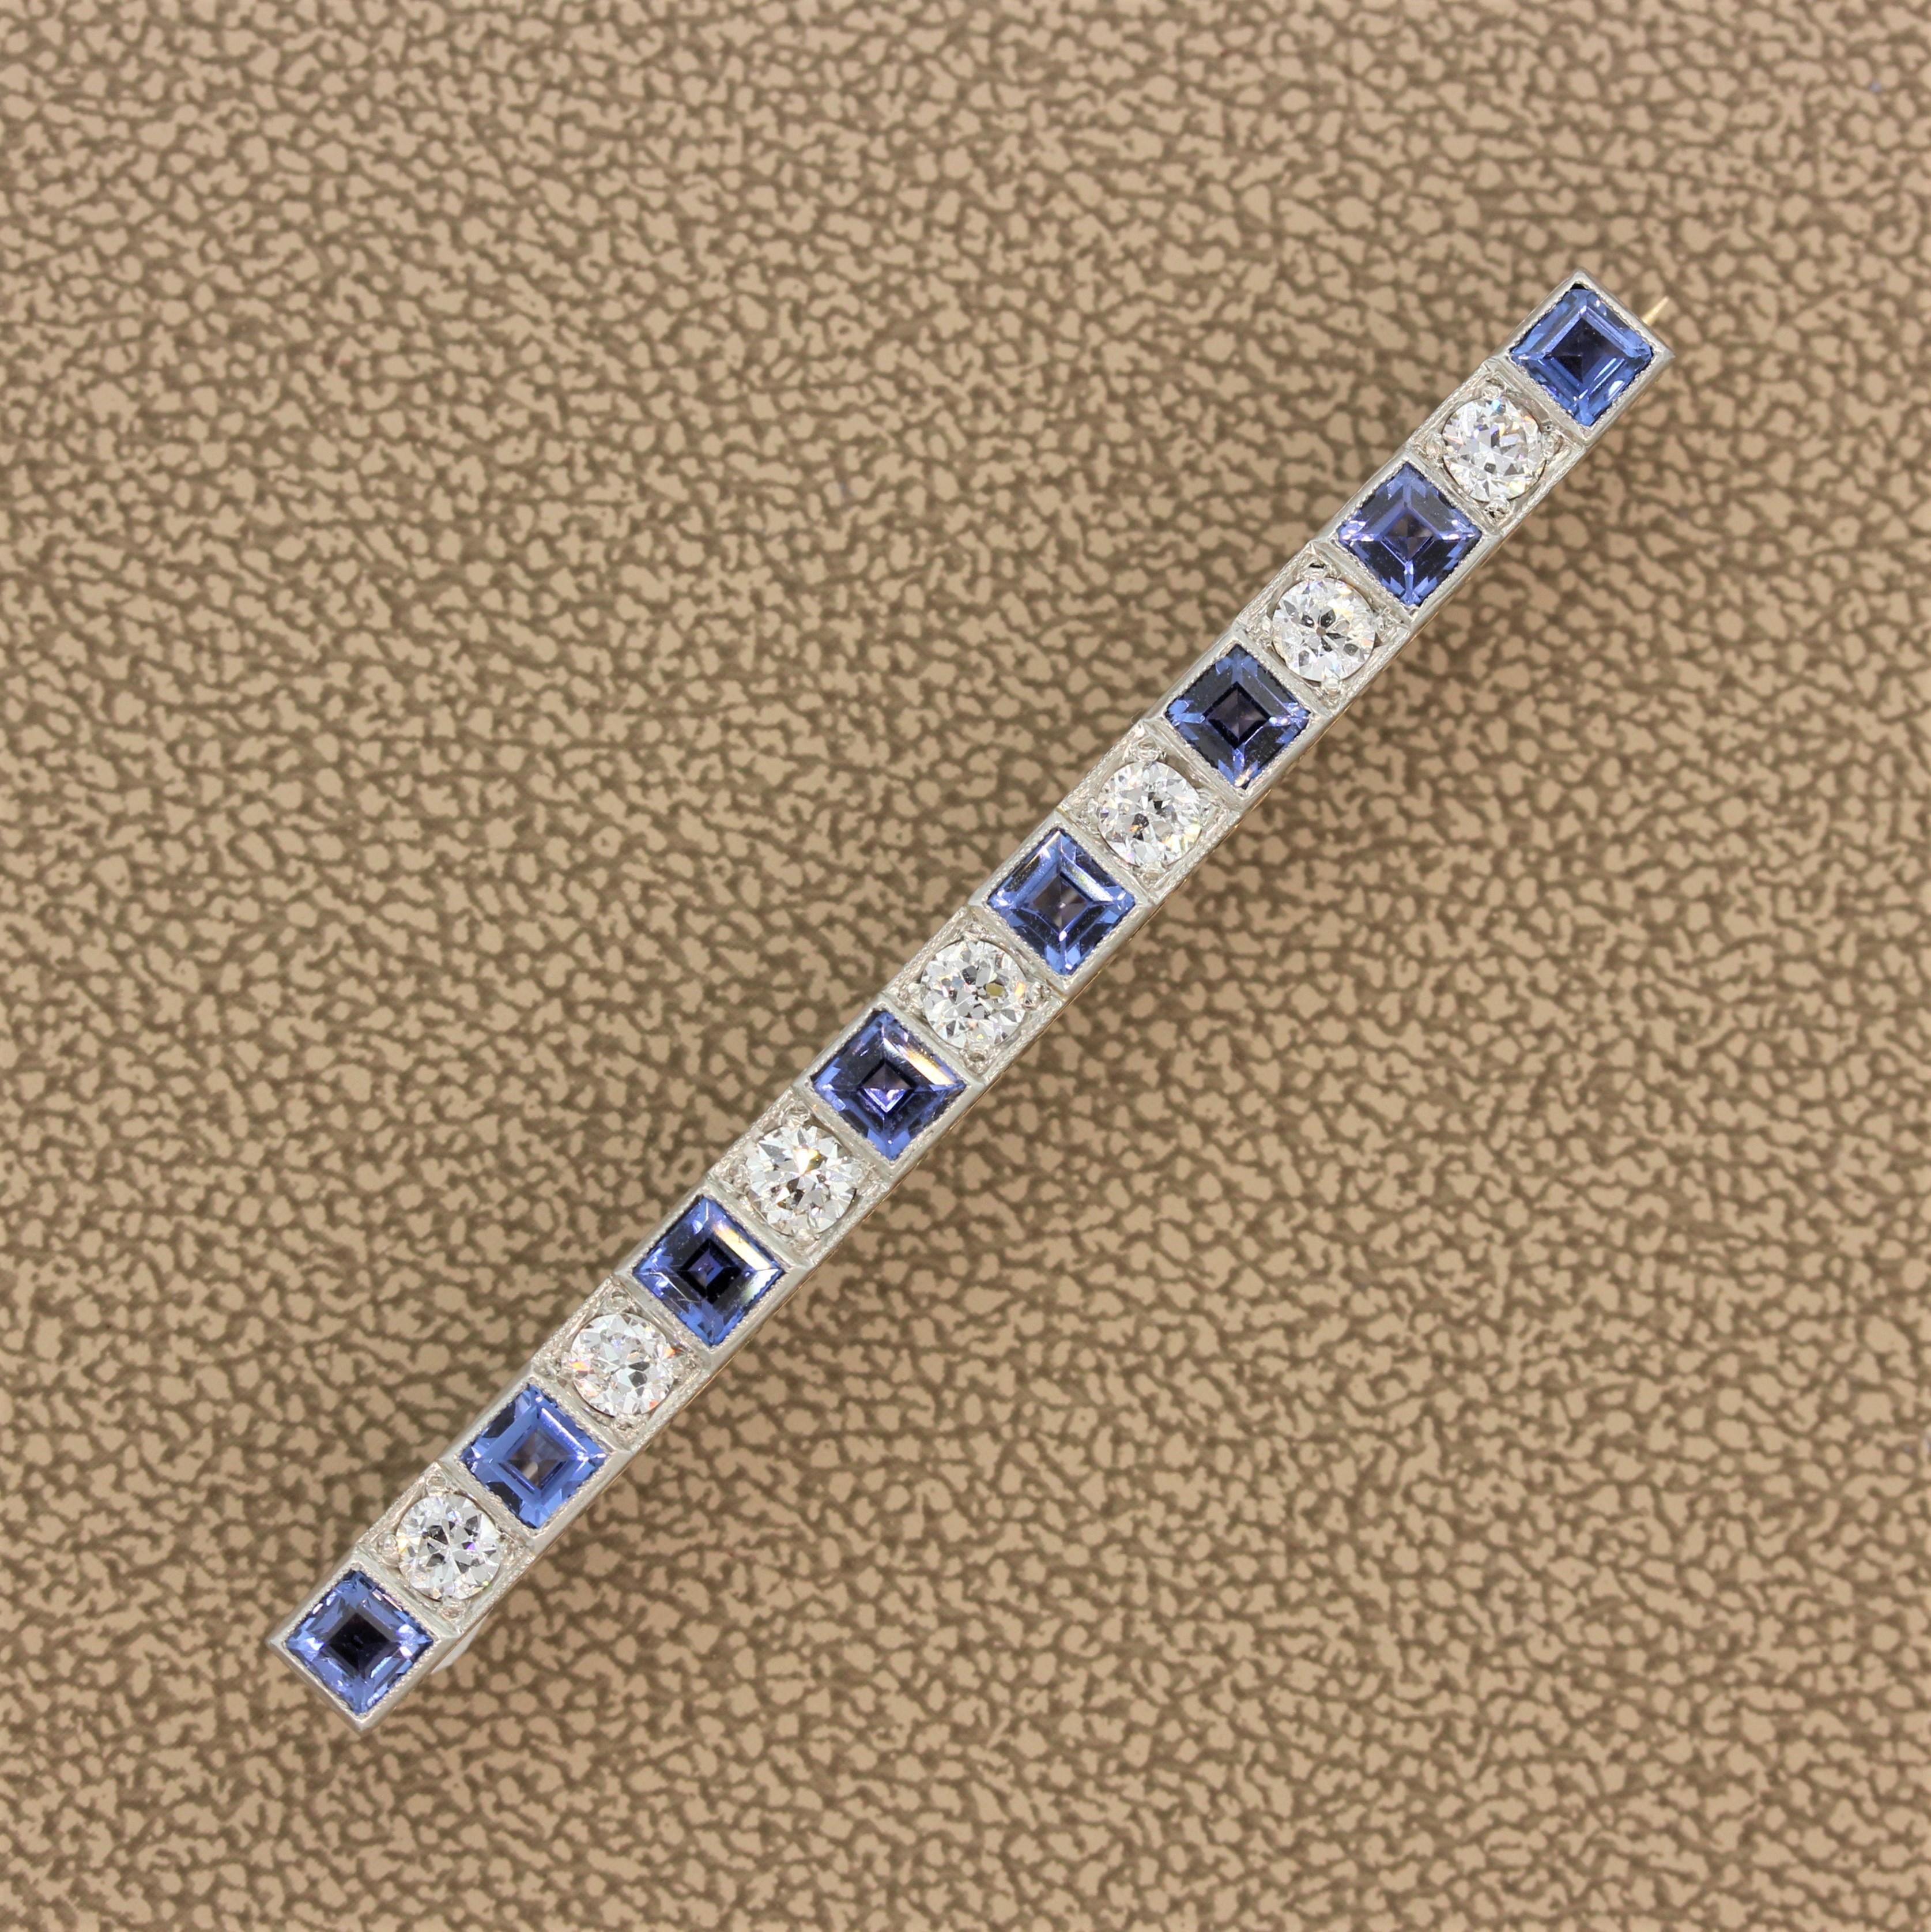 A lovely Art Deco bar pin featuring o European cut diamonds alternating with princess cut blue sapphires set in platinum. The pin is hand-fabricated in 14k yellow gold which is topped with platinum.

Brooch Length: 2.25 inches
Brooch Width: 0.20